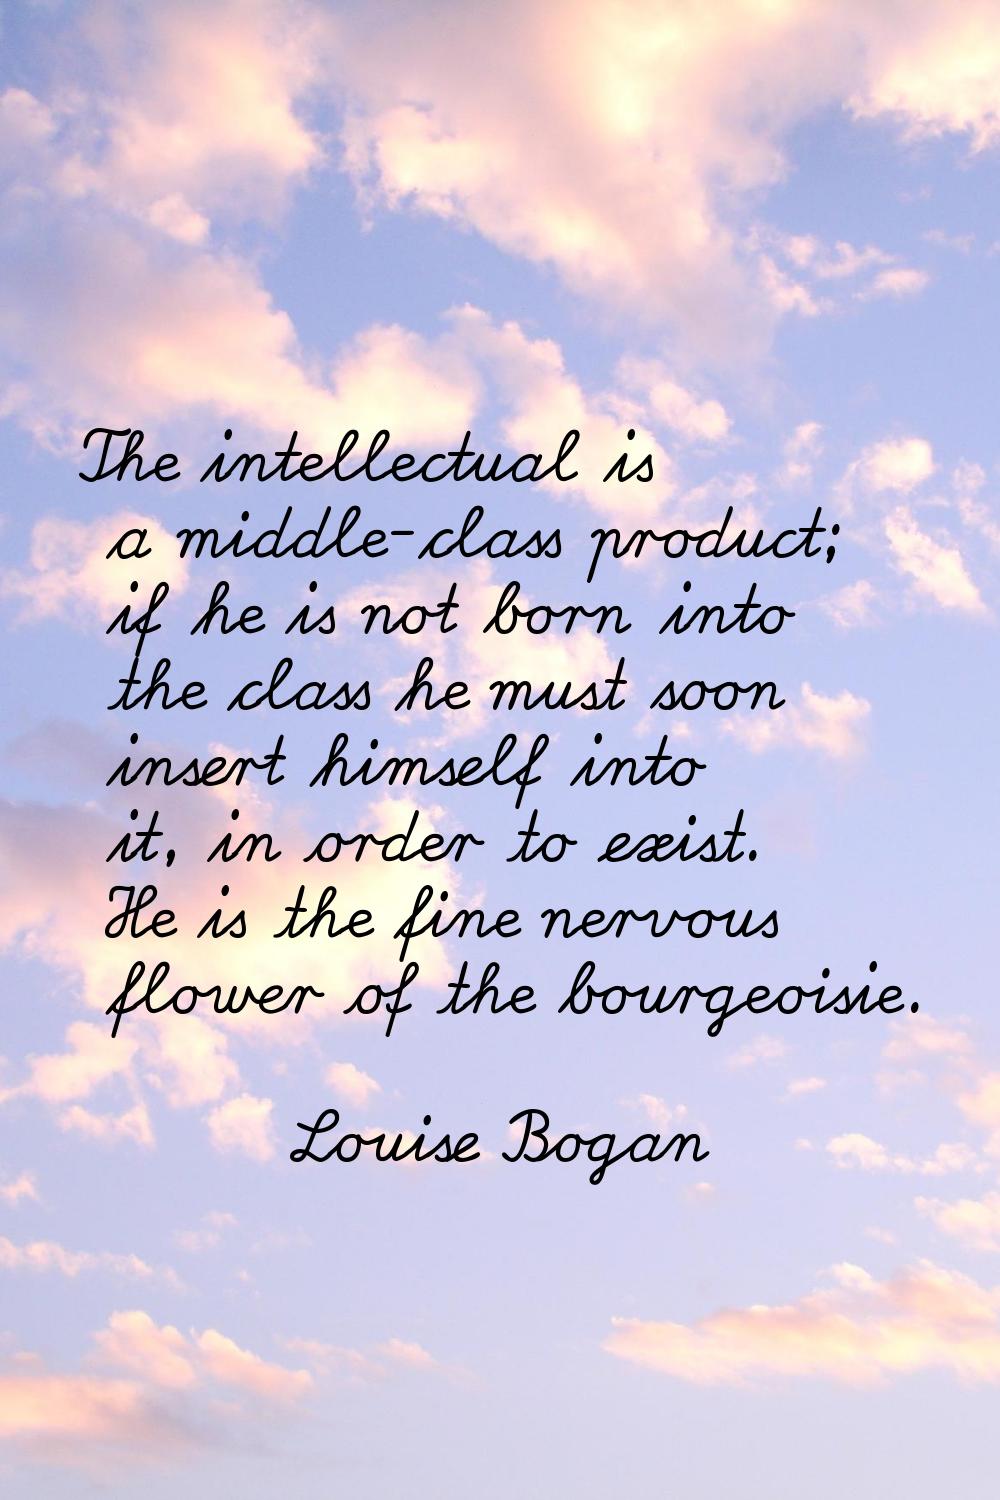 The intellectual is a middle-class product; if he is not born into the class he must soon insert hi